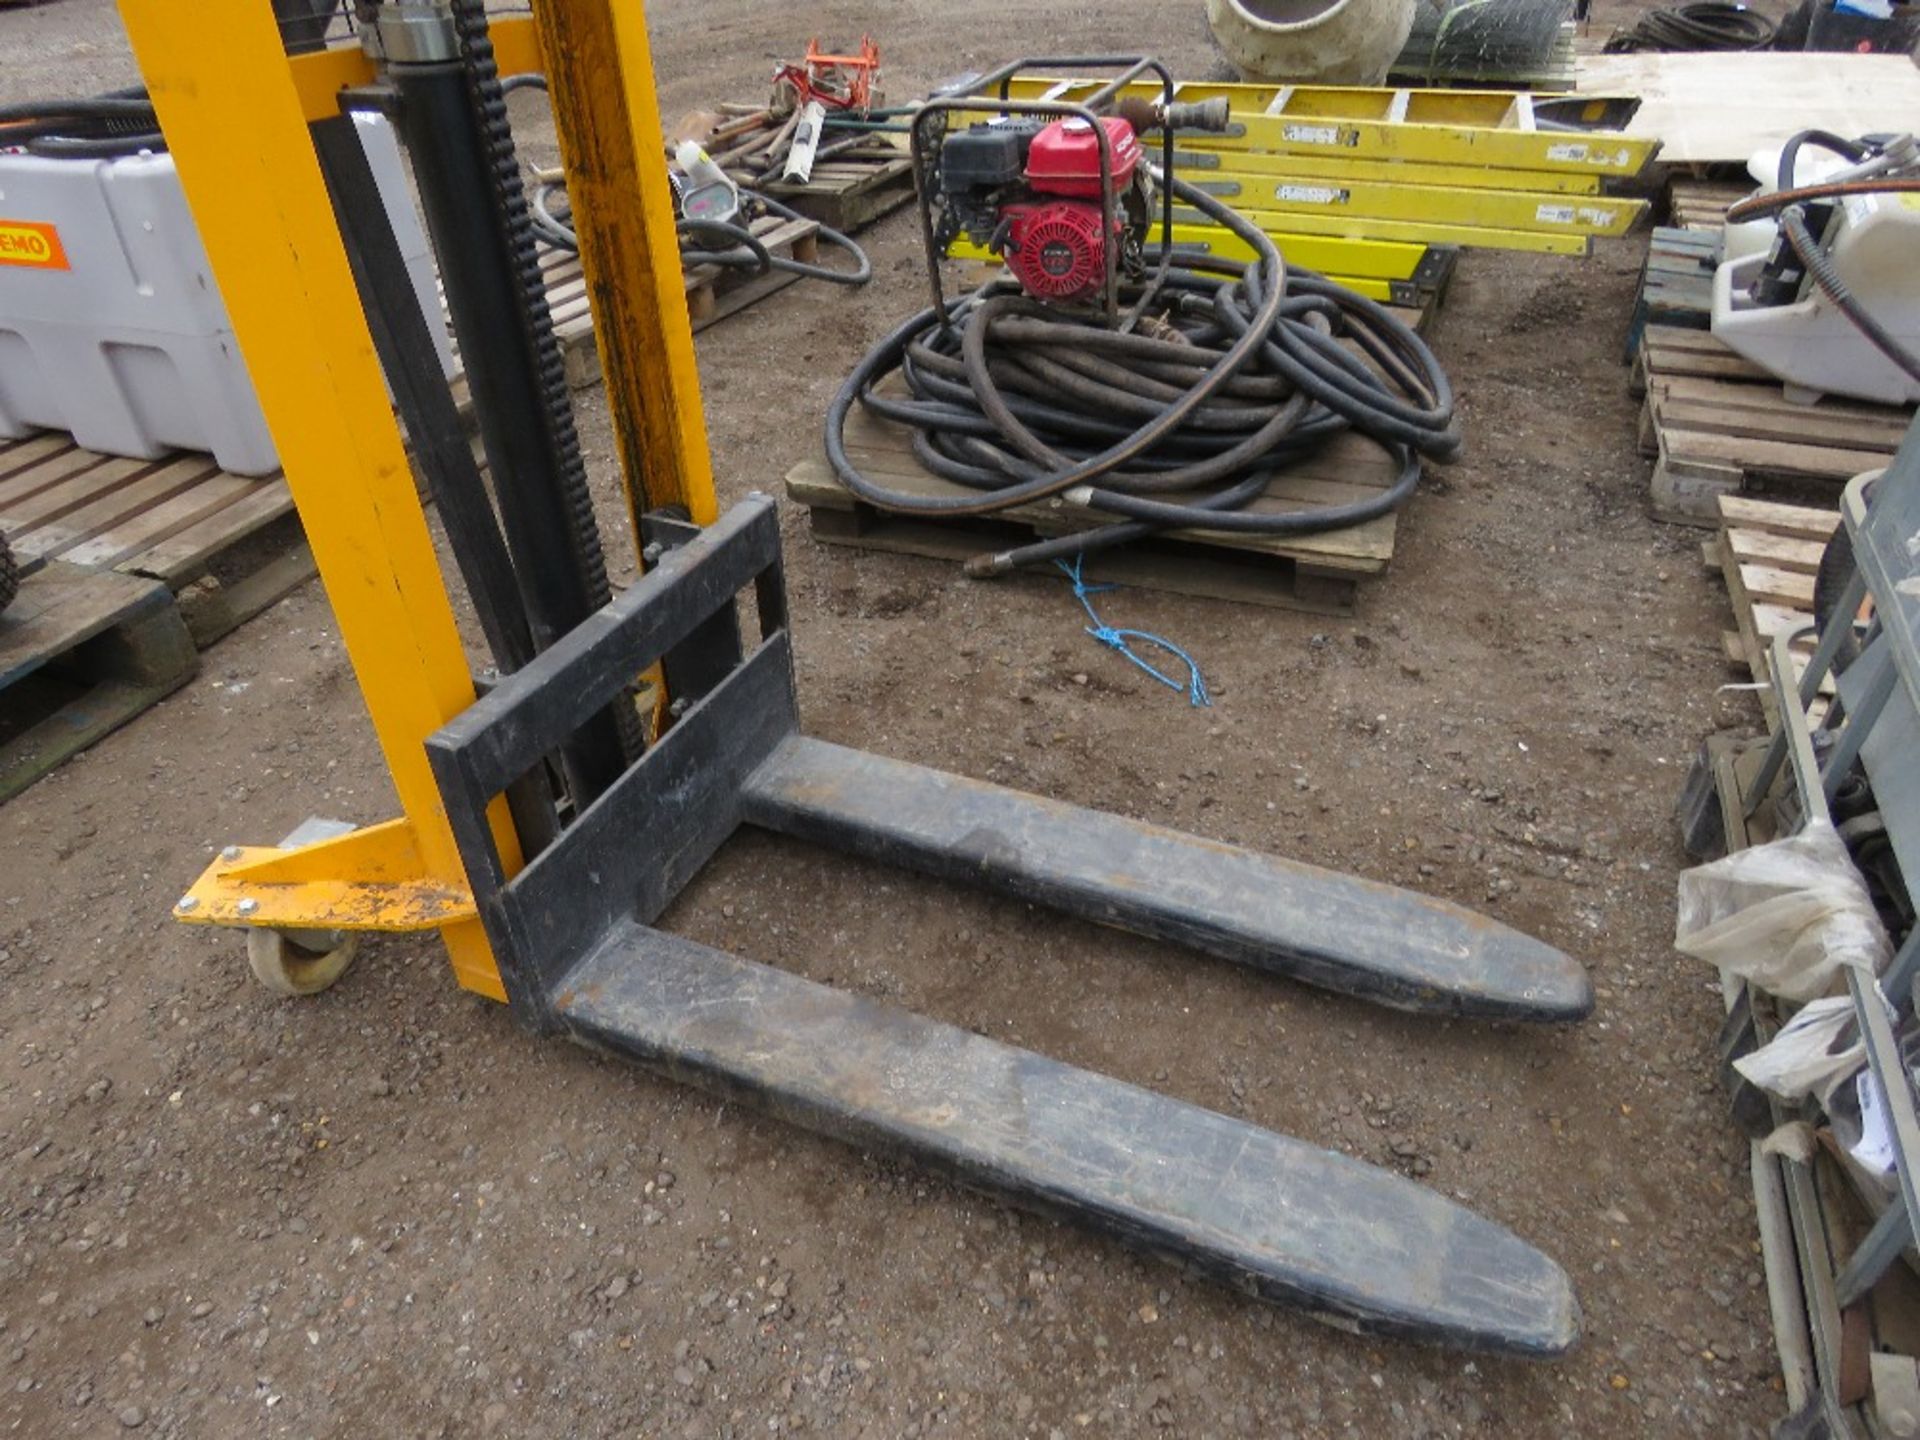 HAND STACKER MANUAL OPERTAED FORKLIFT TRUCK, 1 TONNE MAXIMUM CAPACITY. SOURCED FROM COMPANY LIQUIDA - Image 2 of 6